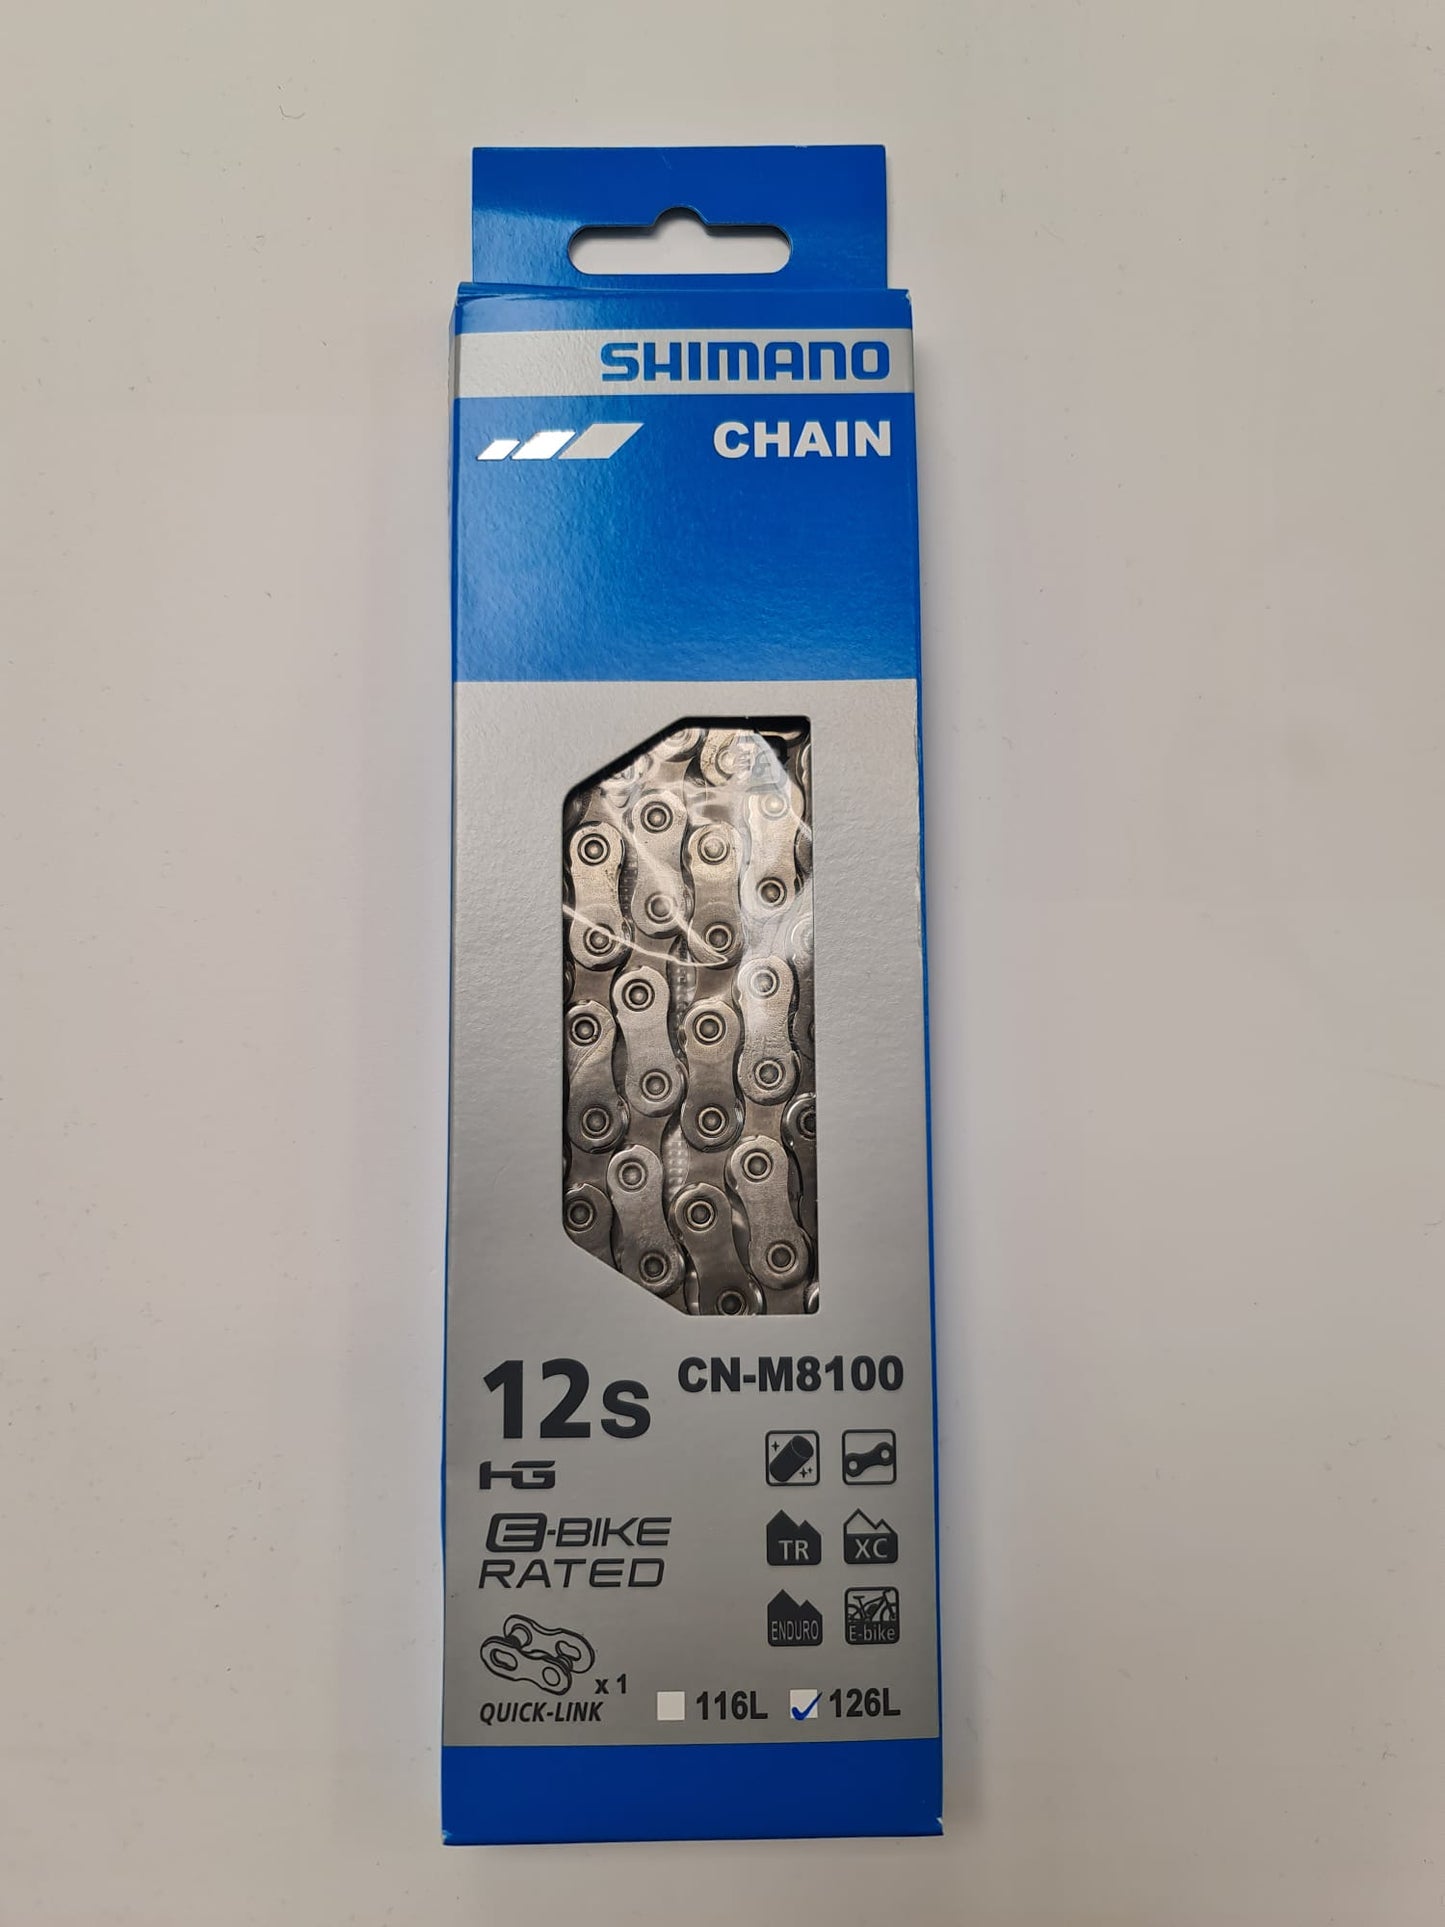 Shimano XT CN-M8100 Chain with Quick Link 12-Speed 126L